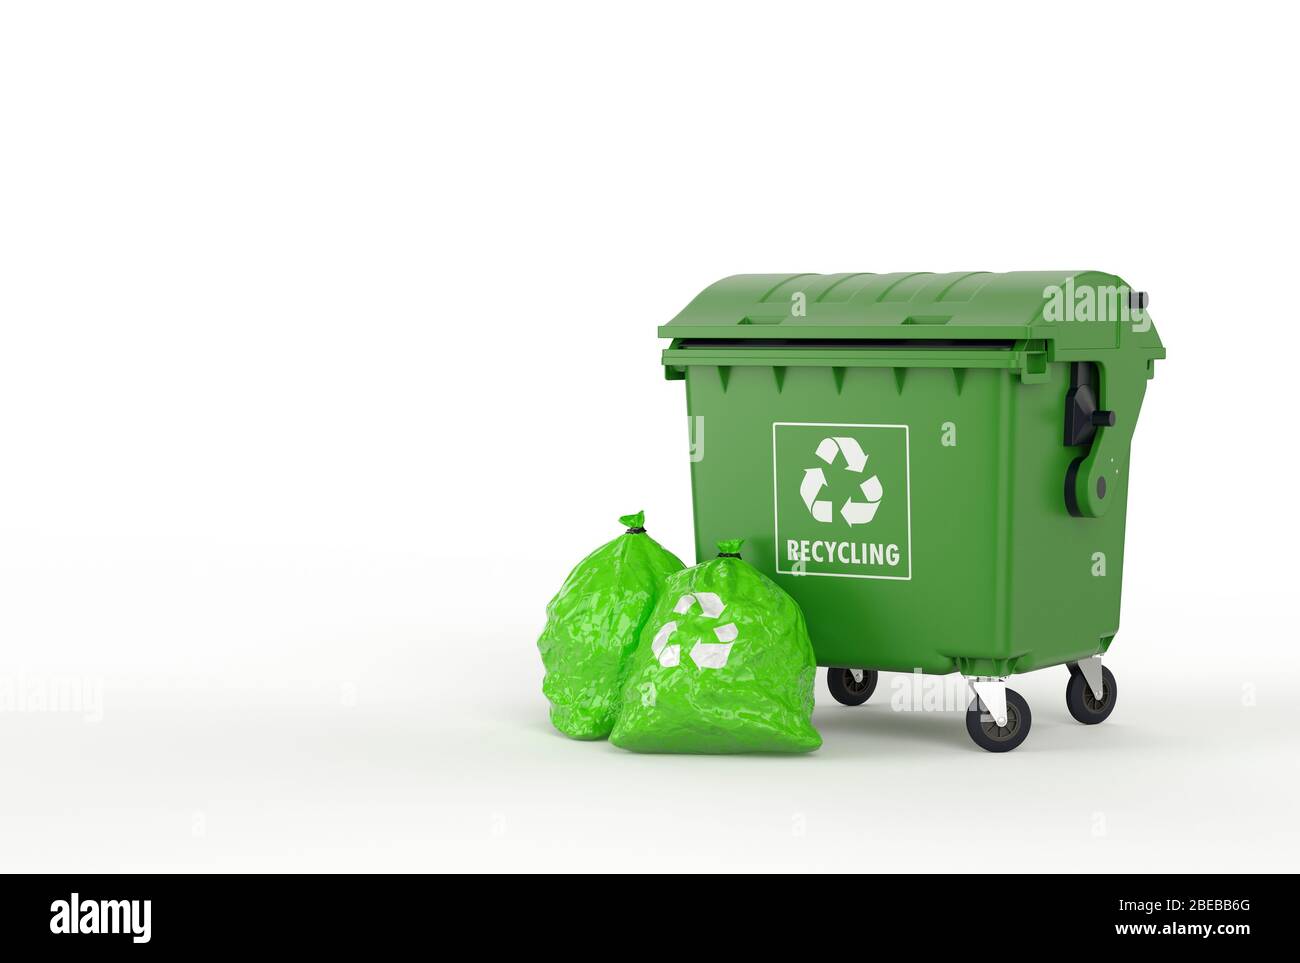 https://c8.alamy.com/comp/2BEBB6G/an-closed-green-recycling-dumpster-surrounded-by-green-garbage-bags-2BEBB6G.jpg